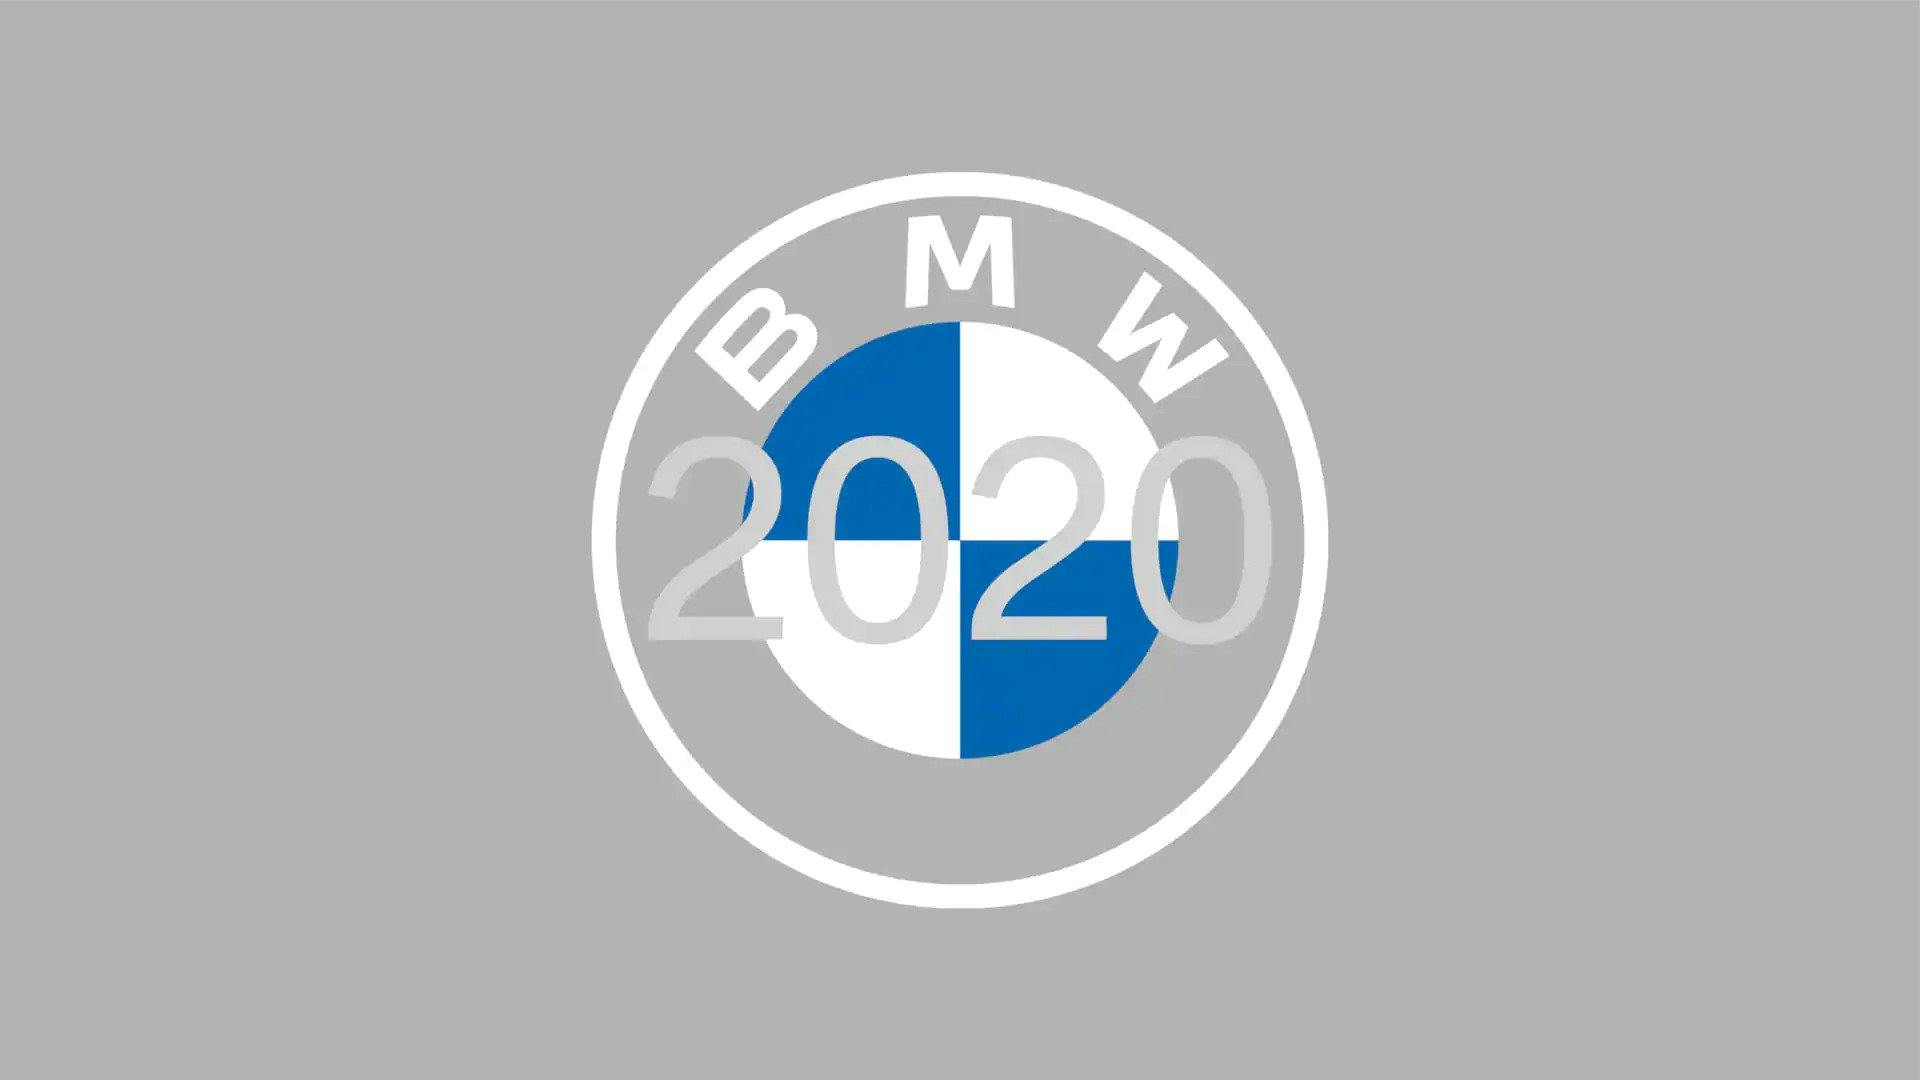 BMW logo redesign for 2020